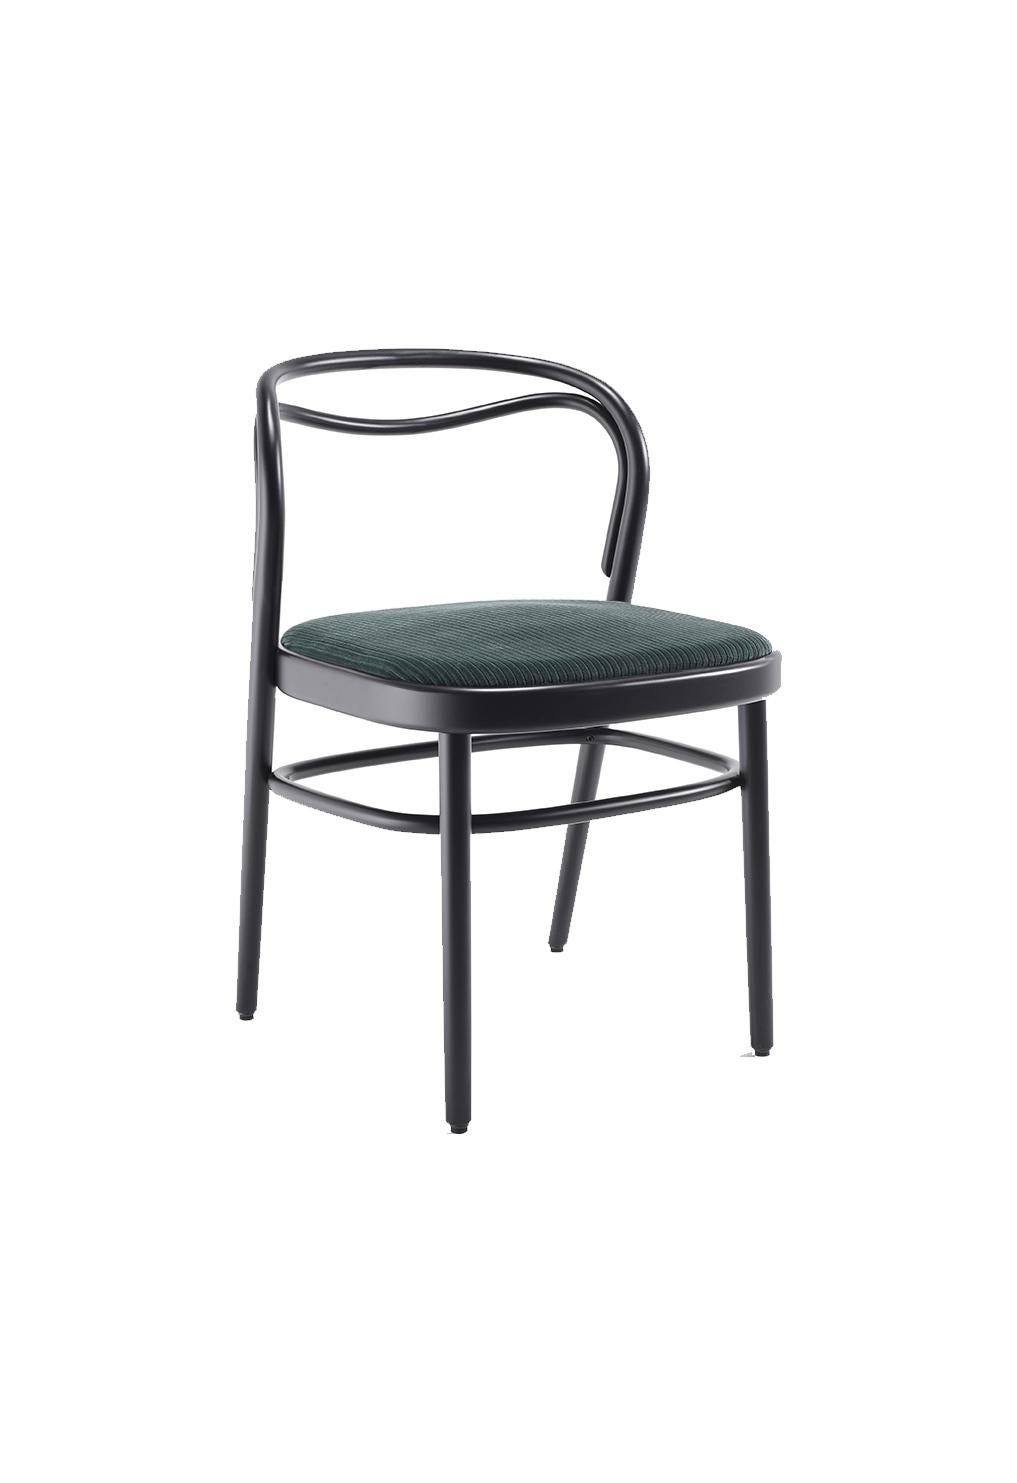 Contemporary Gebrüder Thonet Vienna Beaulieu Chair with Upholstered Seat by Philippe Nigro For Sale